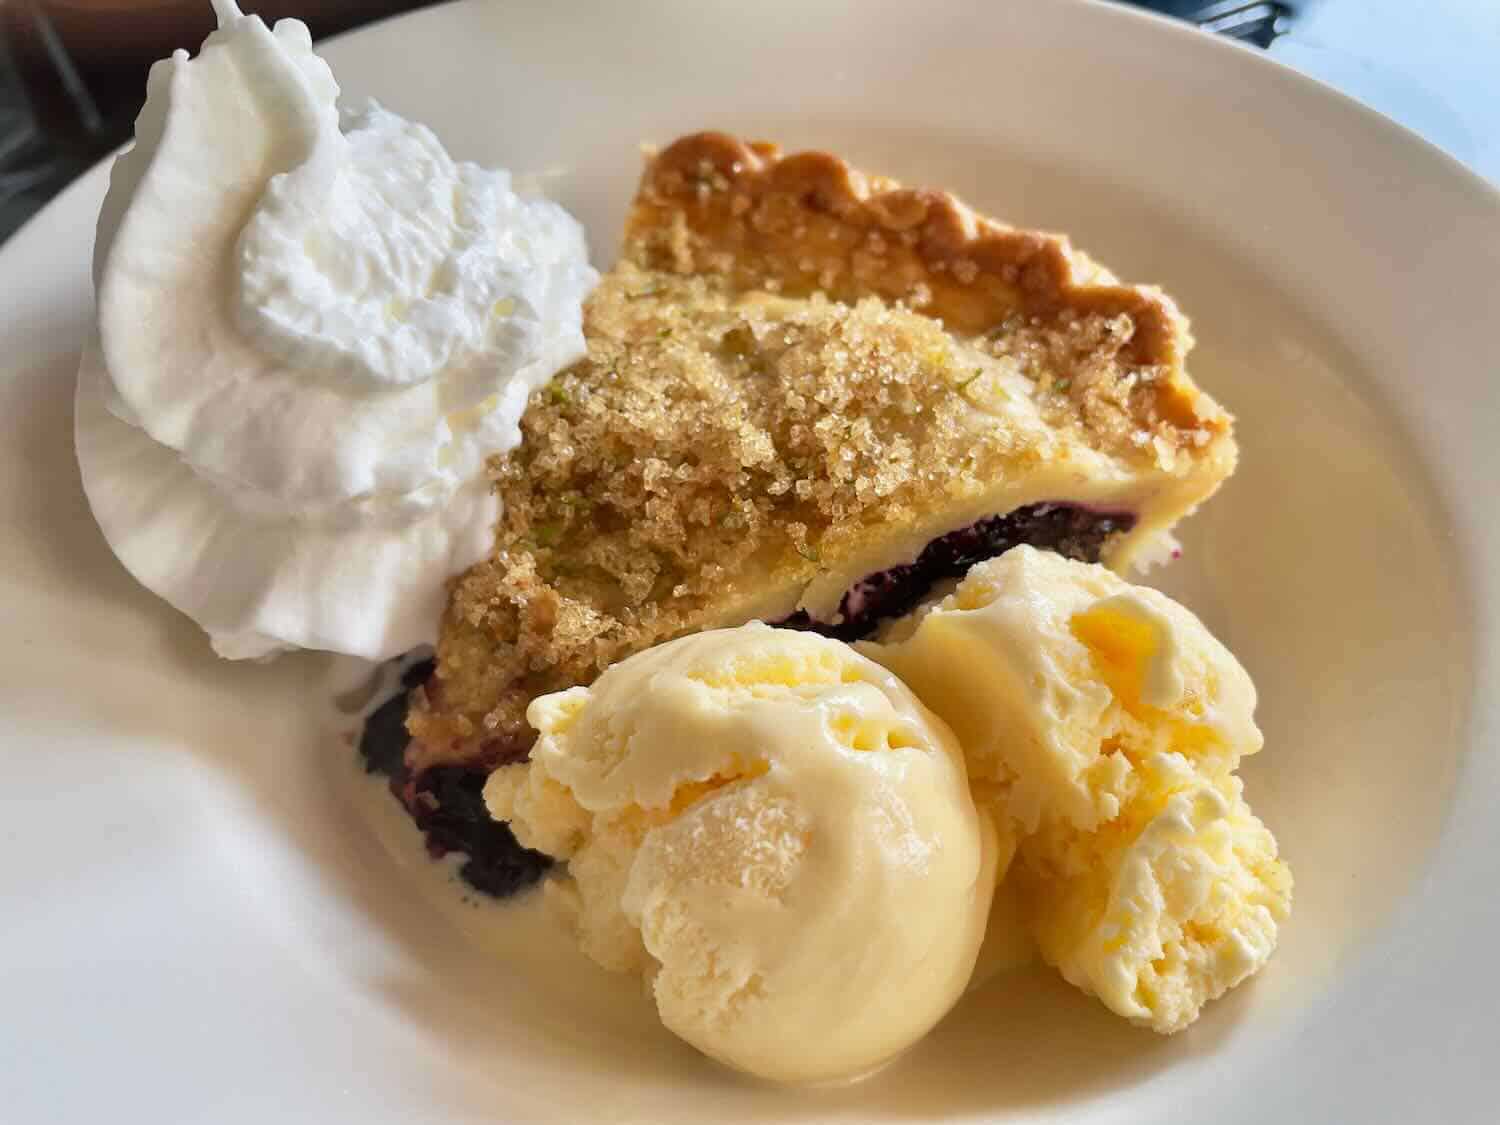 Blueberry pie with ice cream at Side Street Cafe in Bar Harbor, Maine.